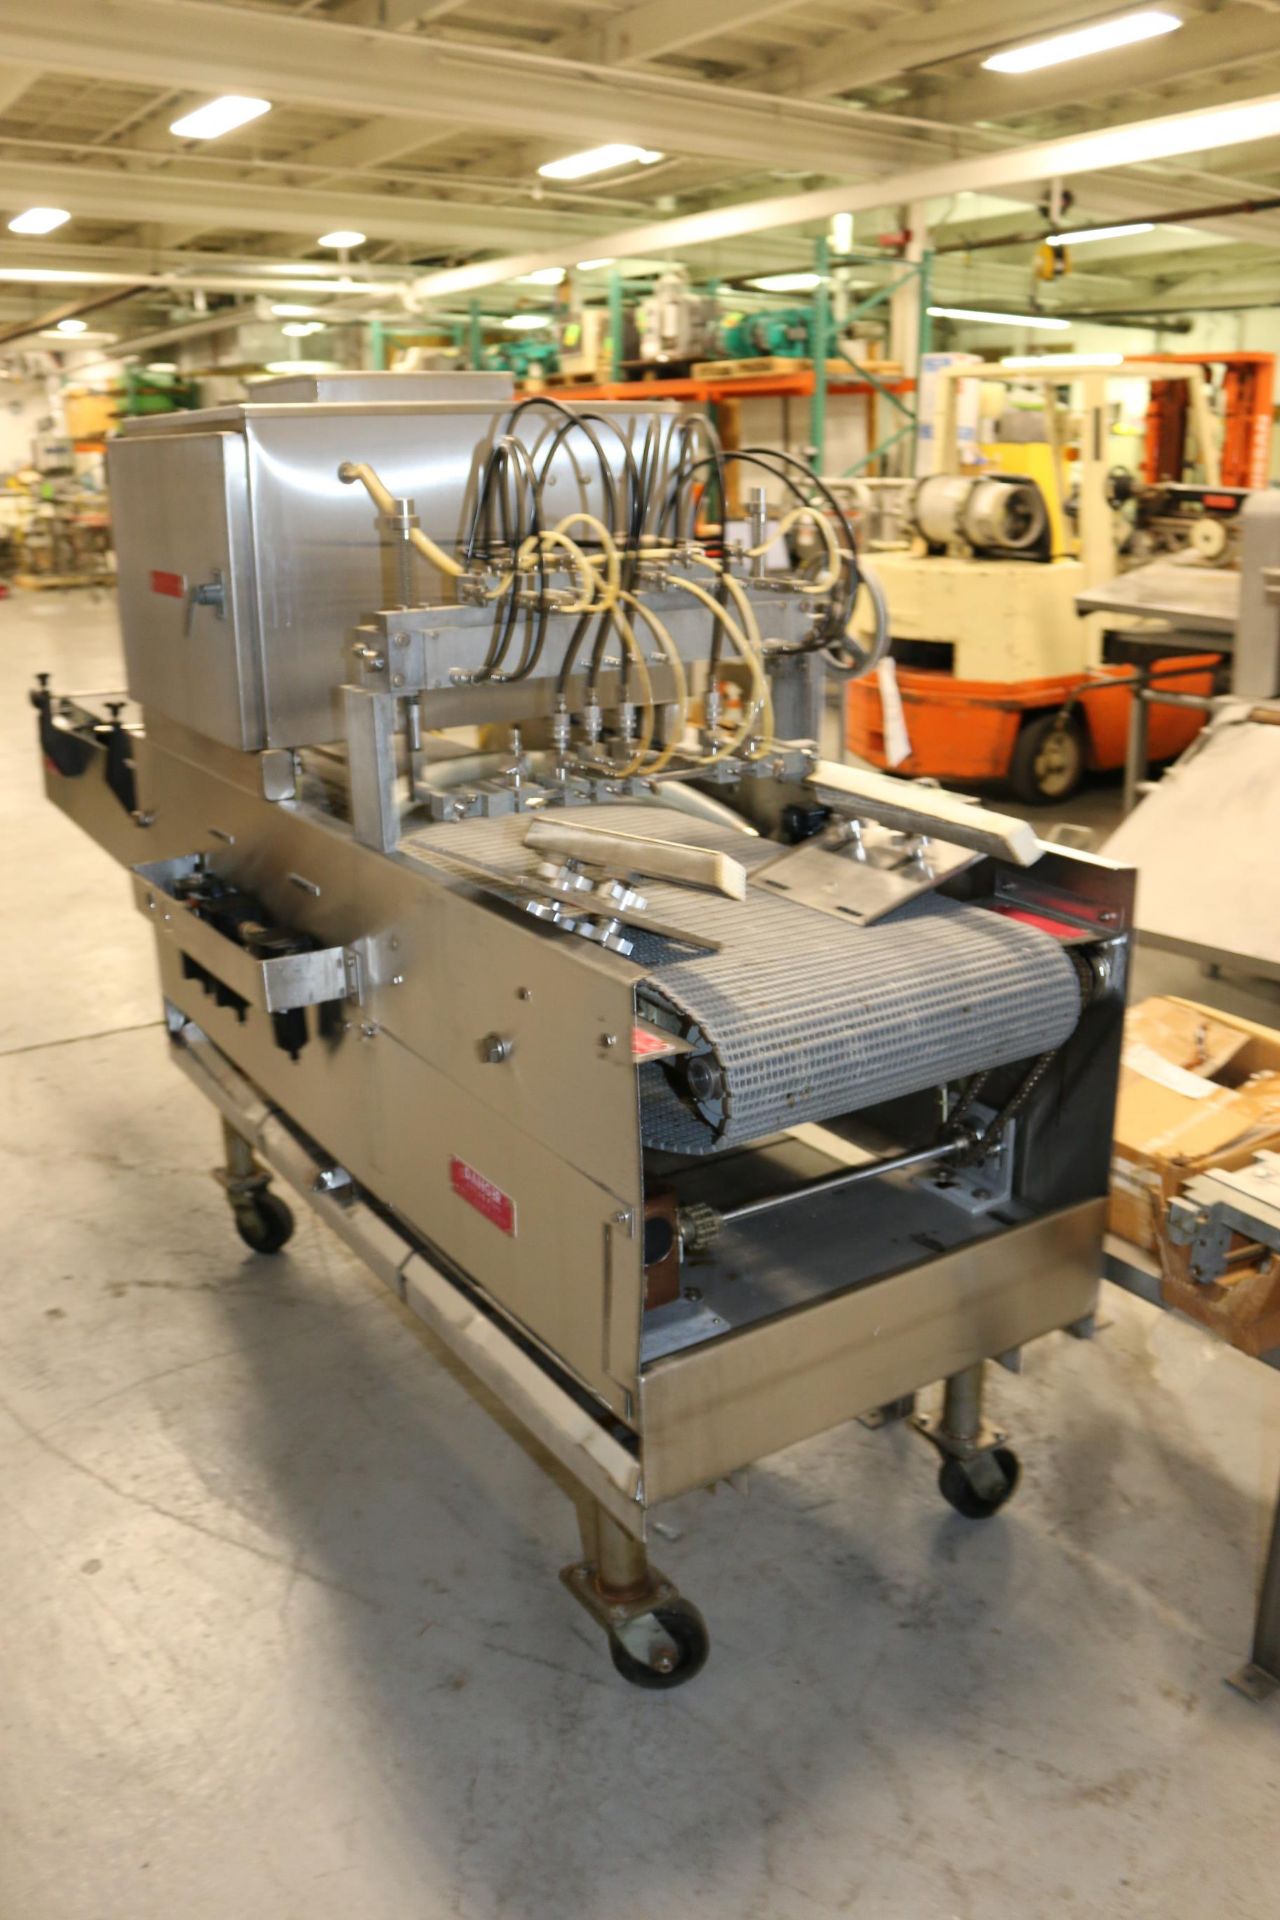 Mallet S/S Cake Pan Greaser, M/N 400C-FT 91777, S/N 123-428, 460 Volts, 3 Phase, with Touchscreen - Image 4 of 12